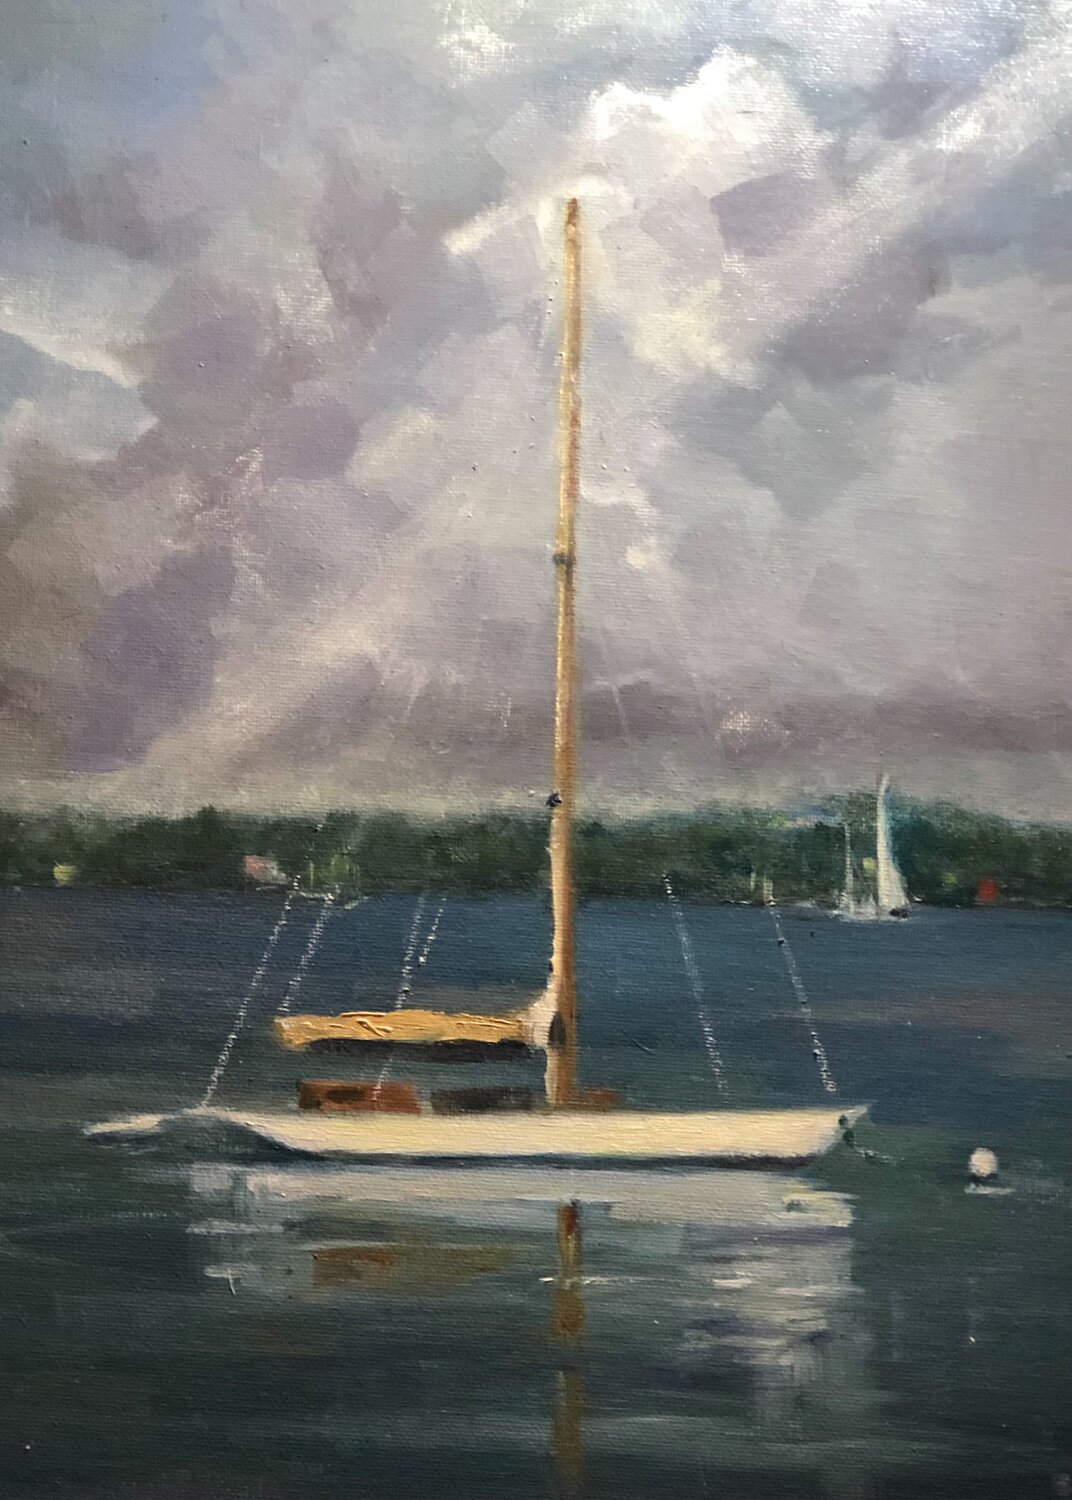 “Anchored Off Shore” is by Lisa Domenic.